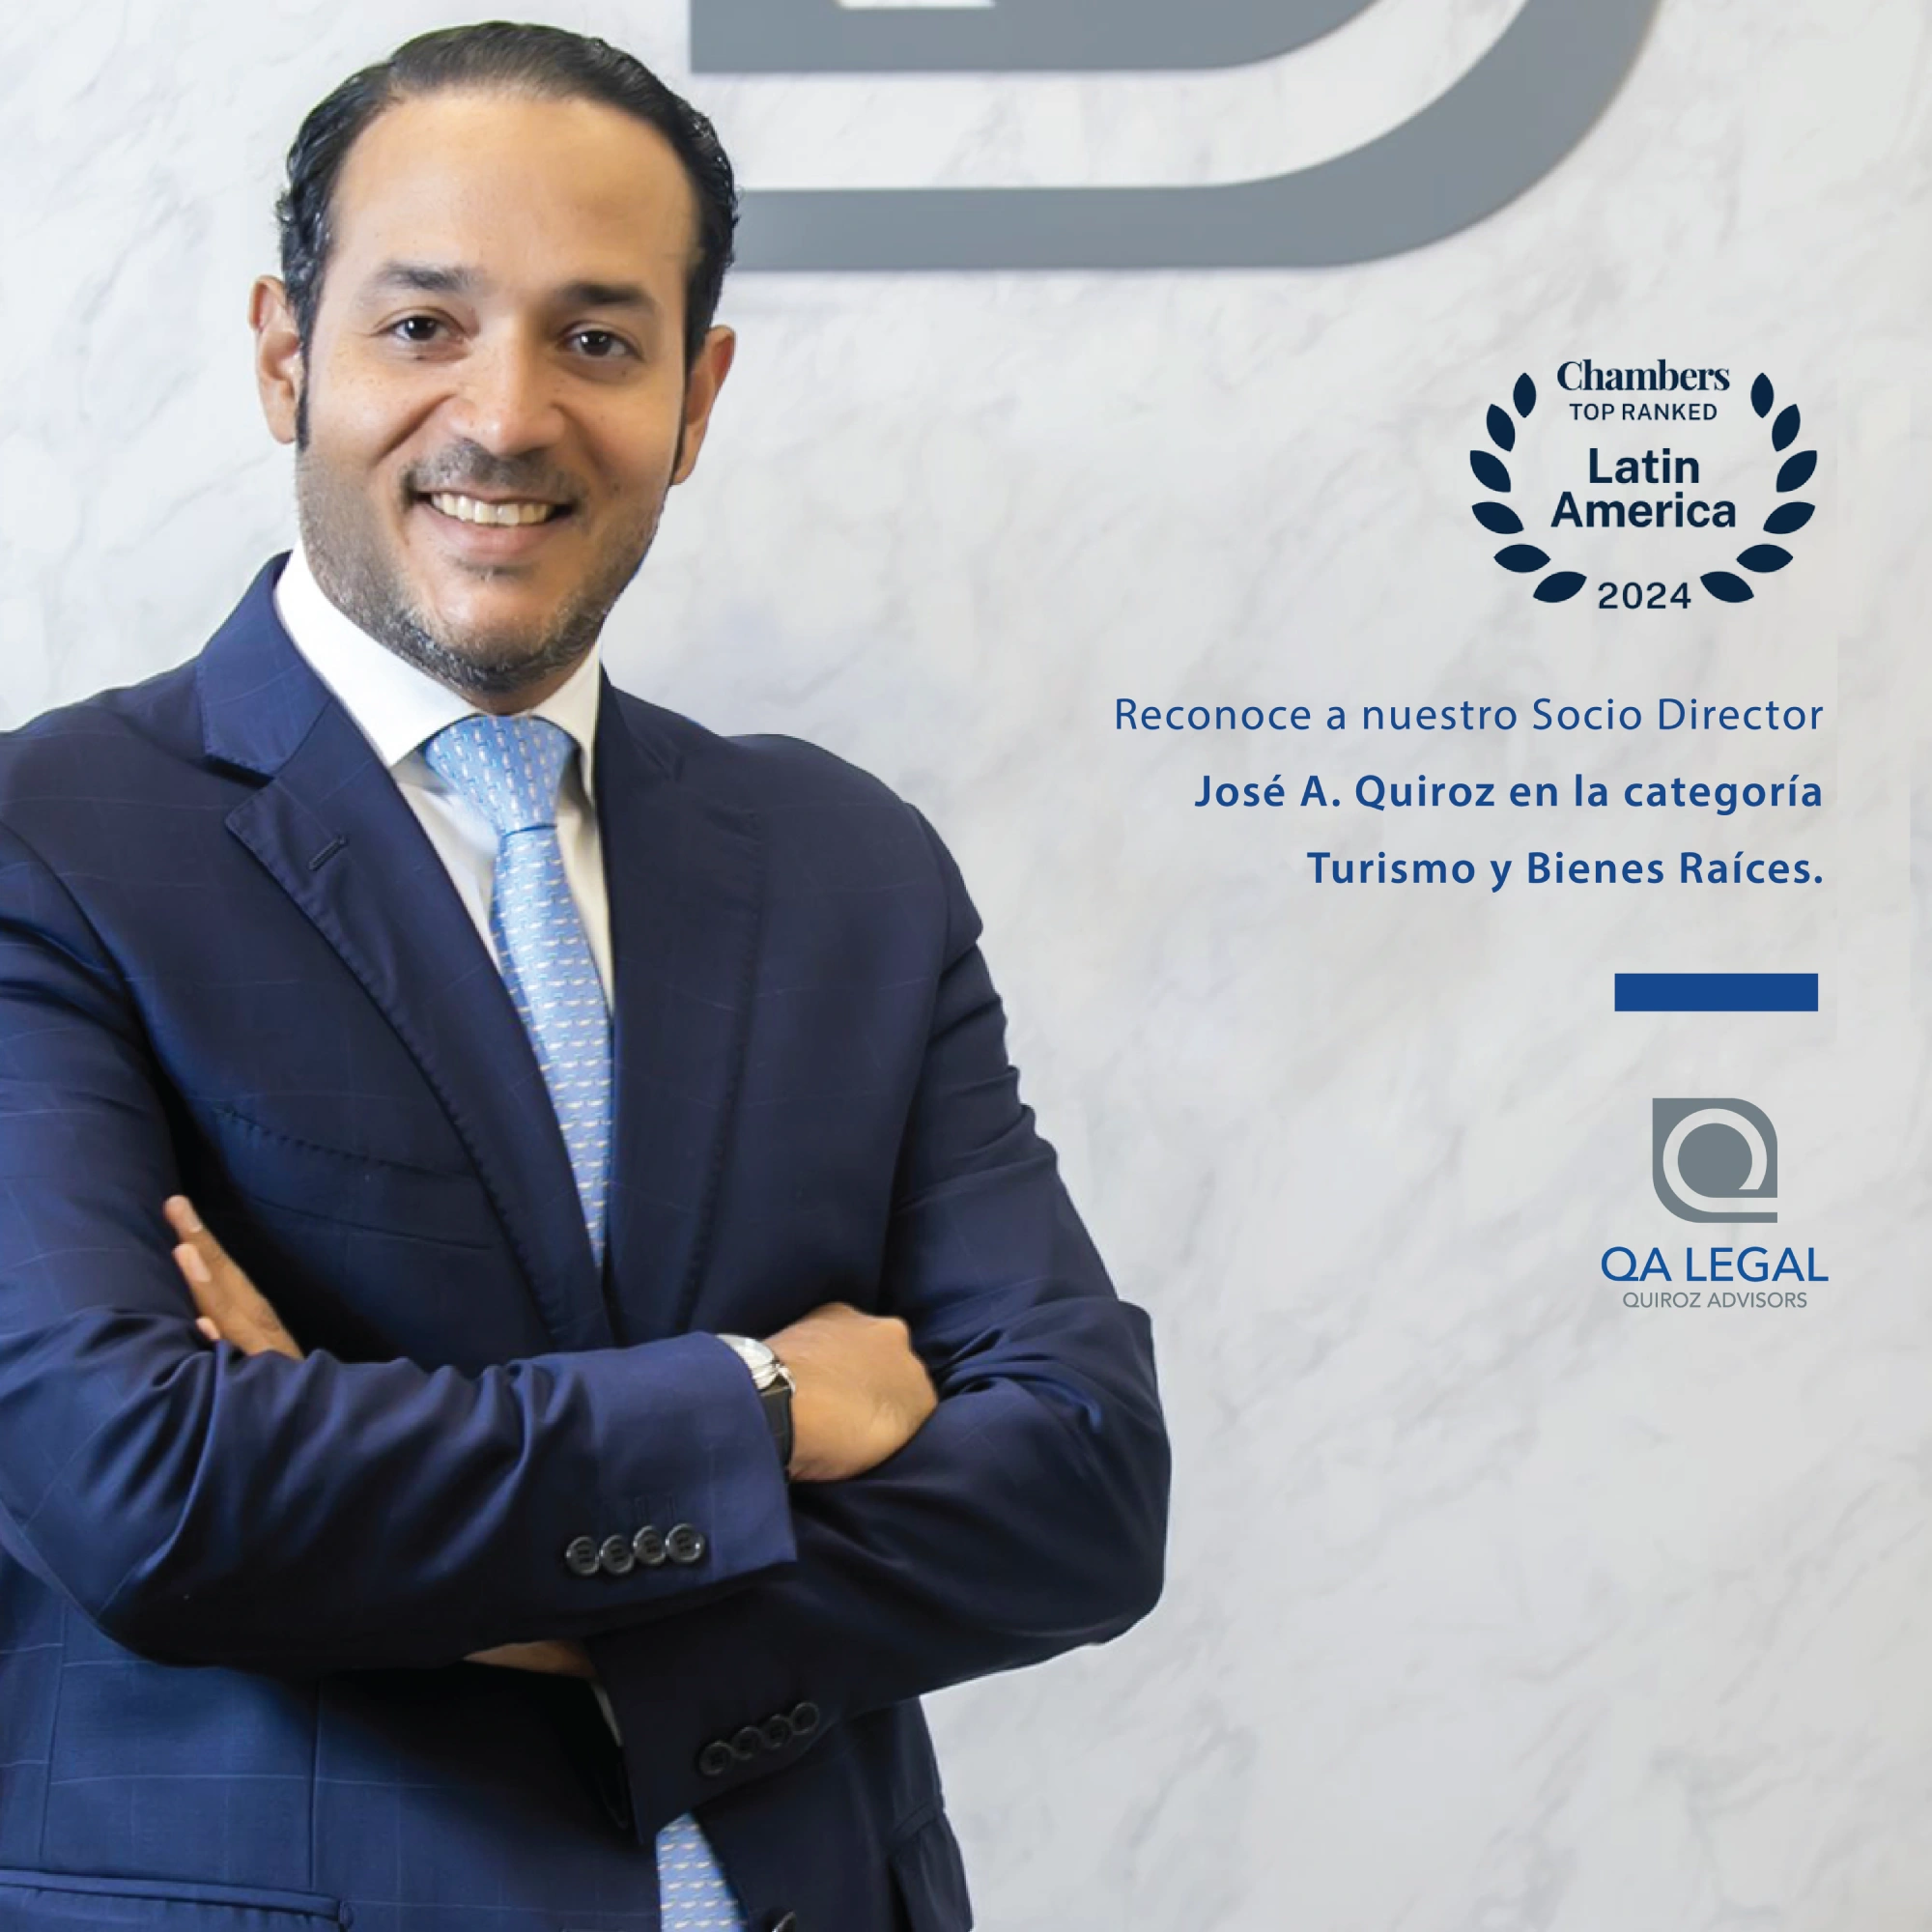 Mr. José Quiroz in the Top Ranking of Chambers Latin America Guide 2024